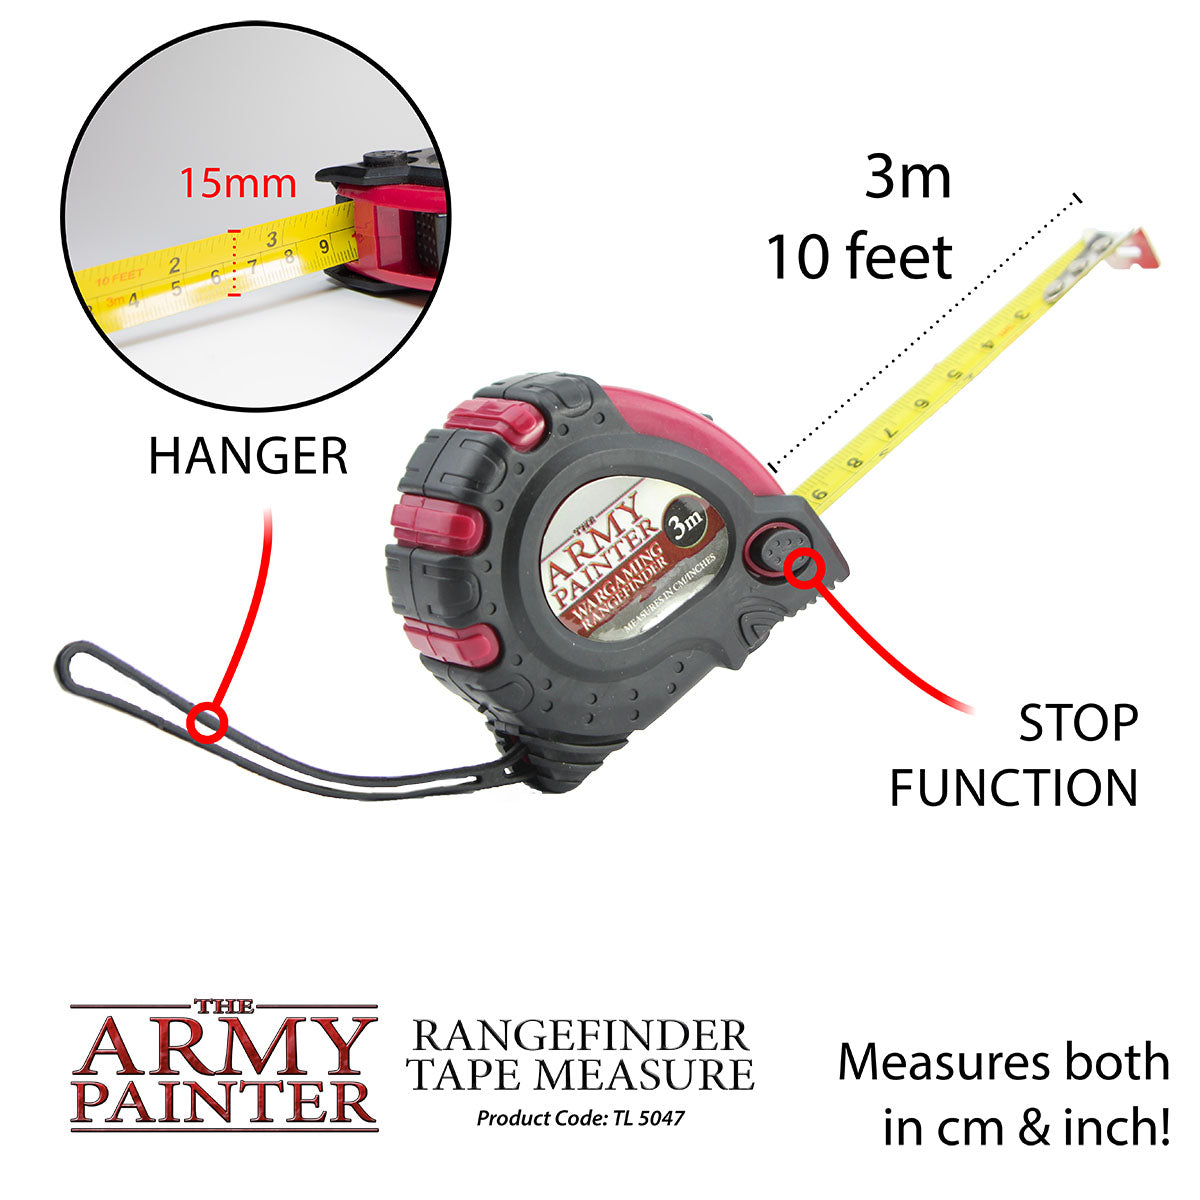 Army Painter Rangefinder Tape Measure | The Clever Kobold